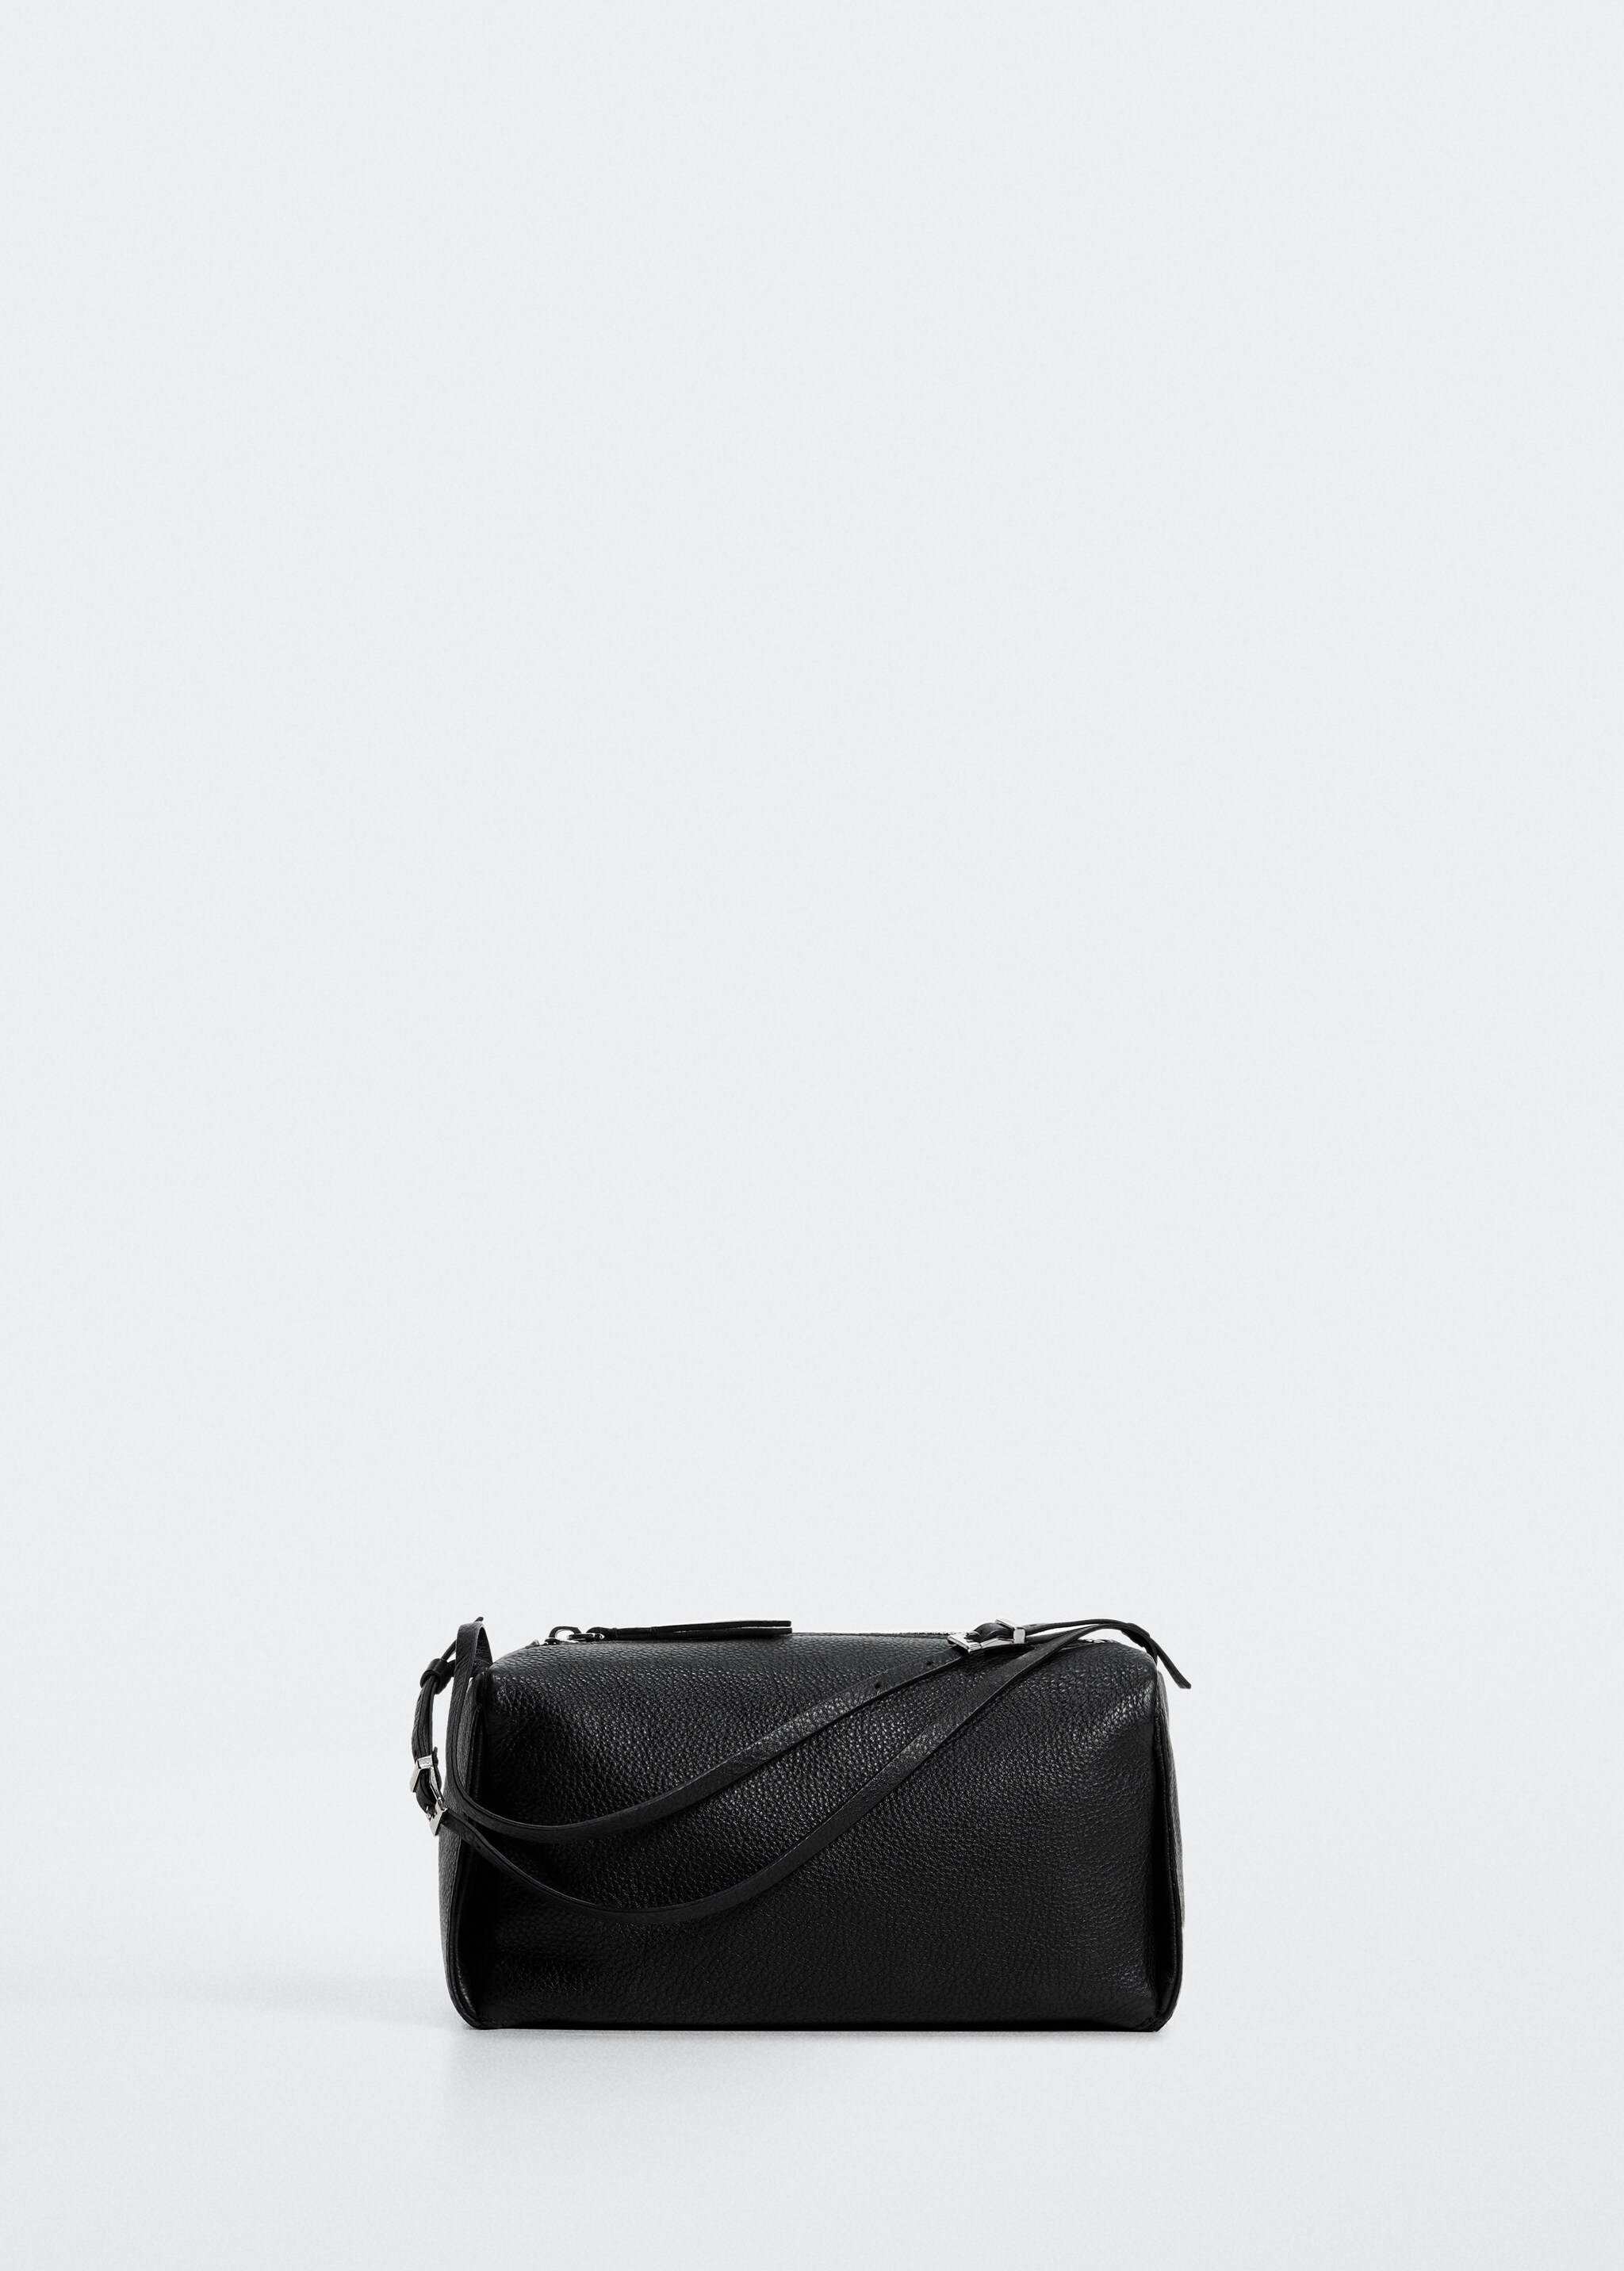 Small leather bag - Article without model